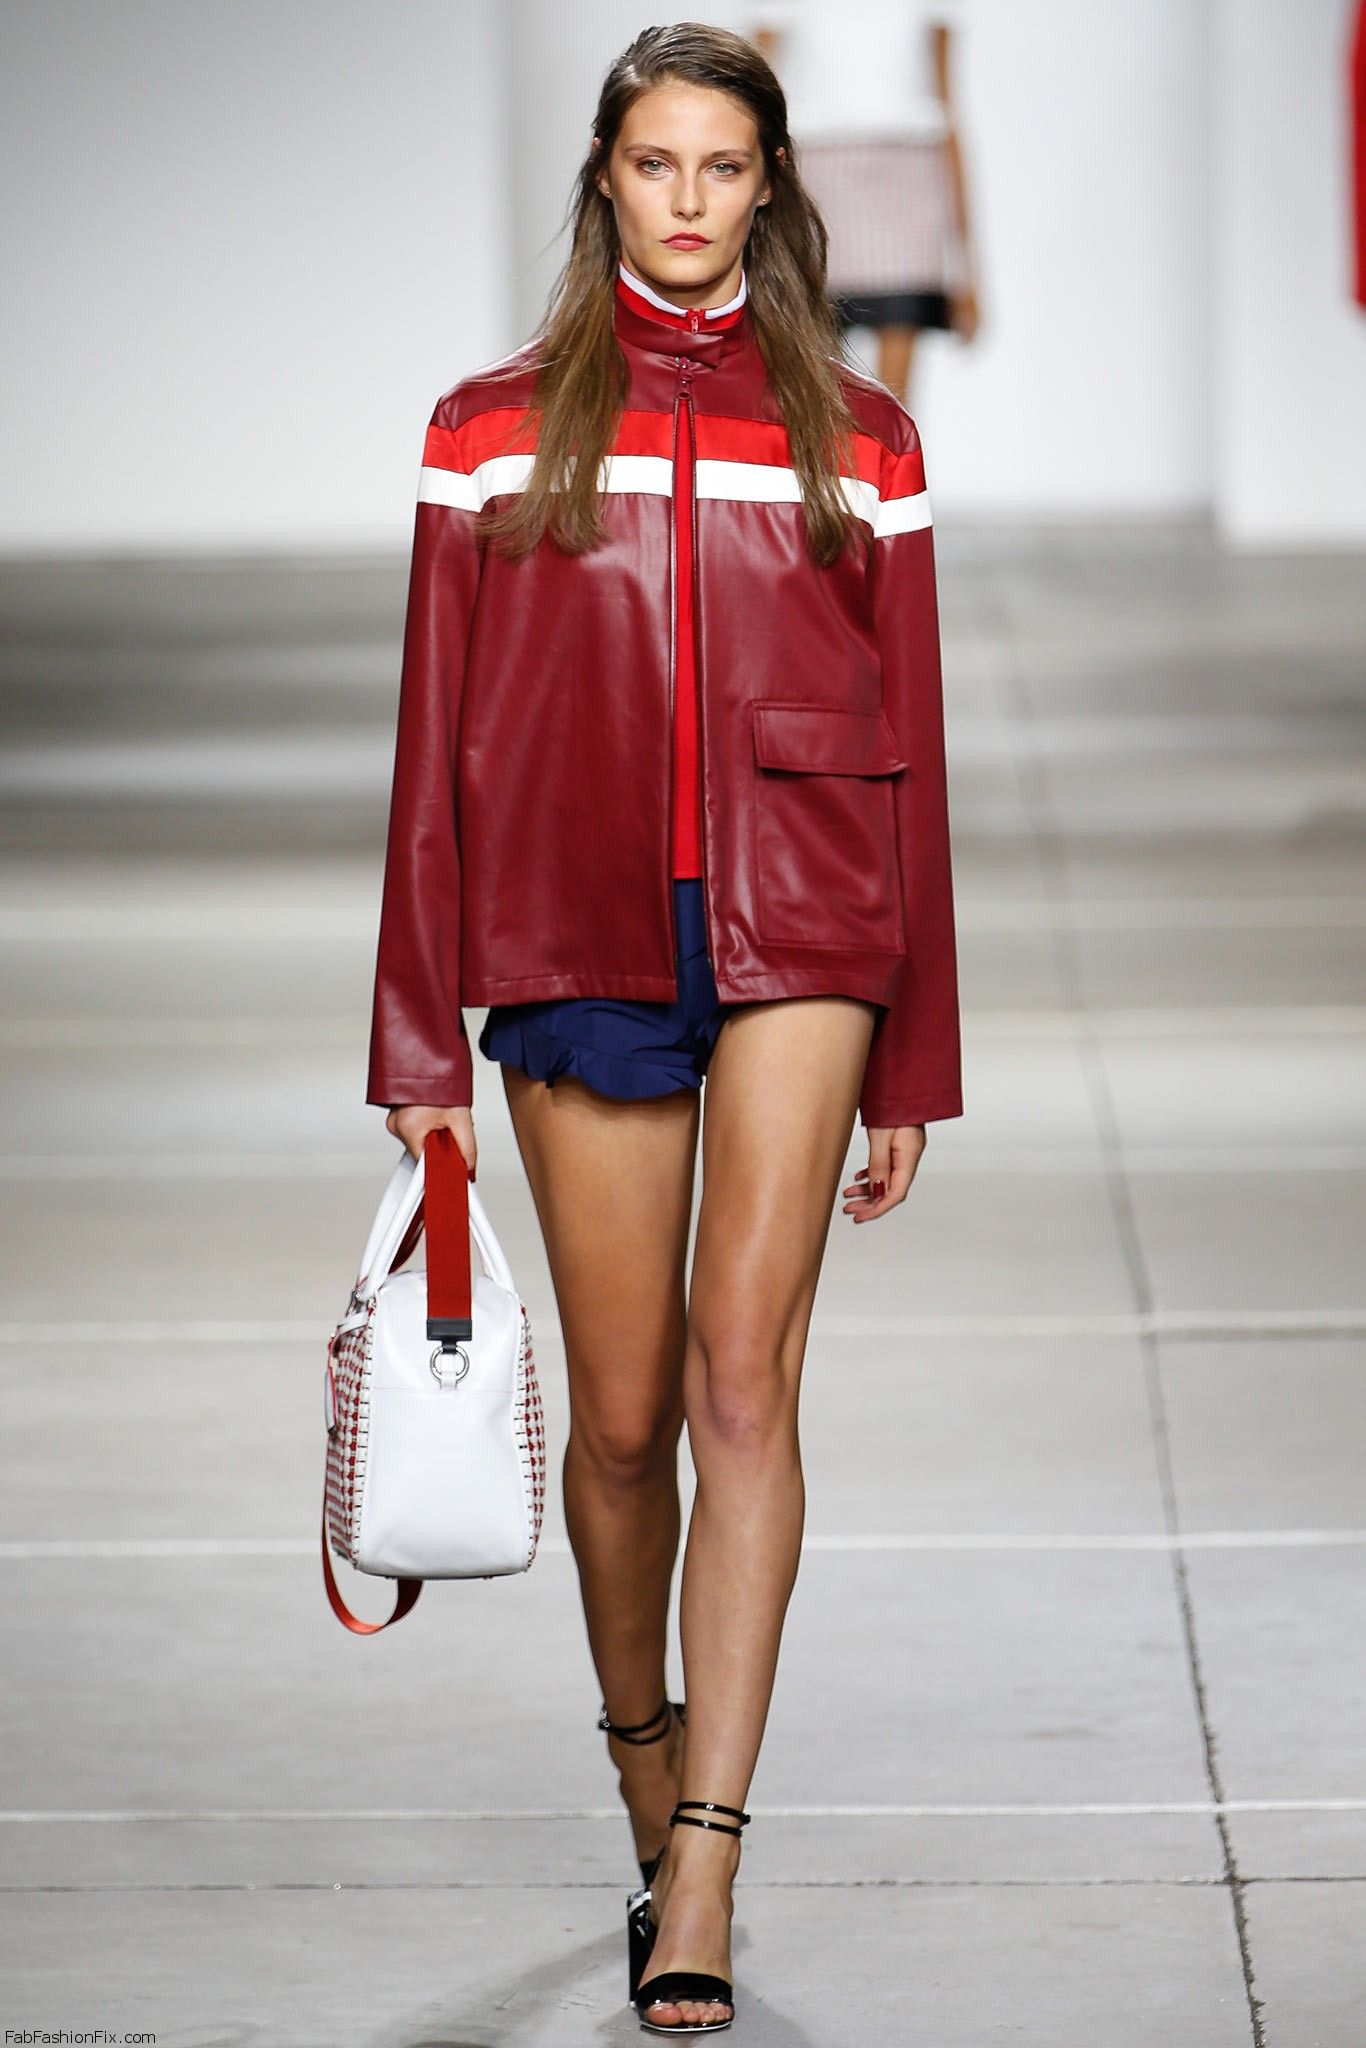 Topshop Unique spring/summer 2015 collection – London fashion week ...